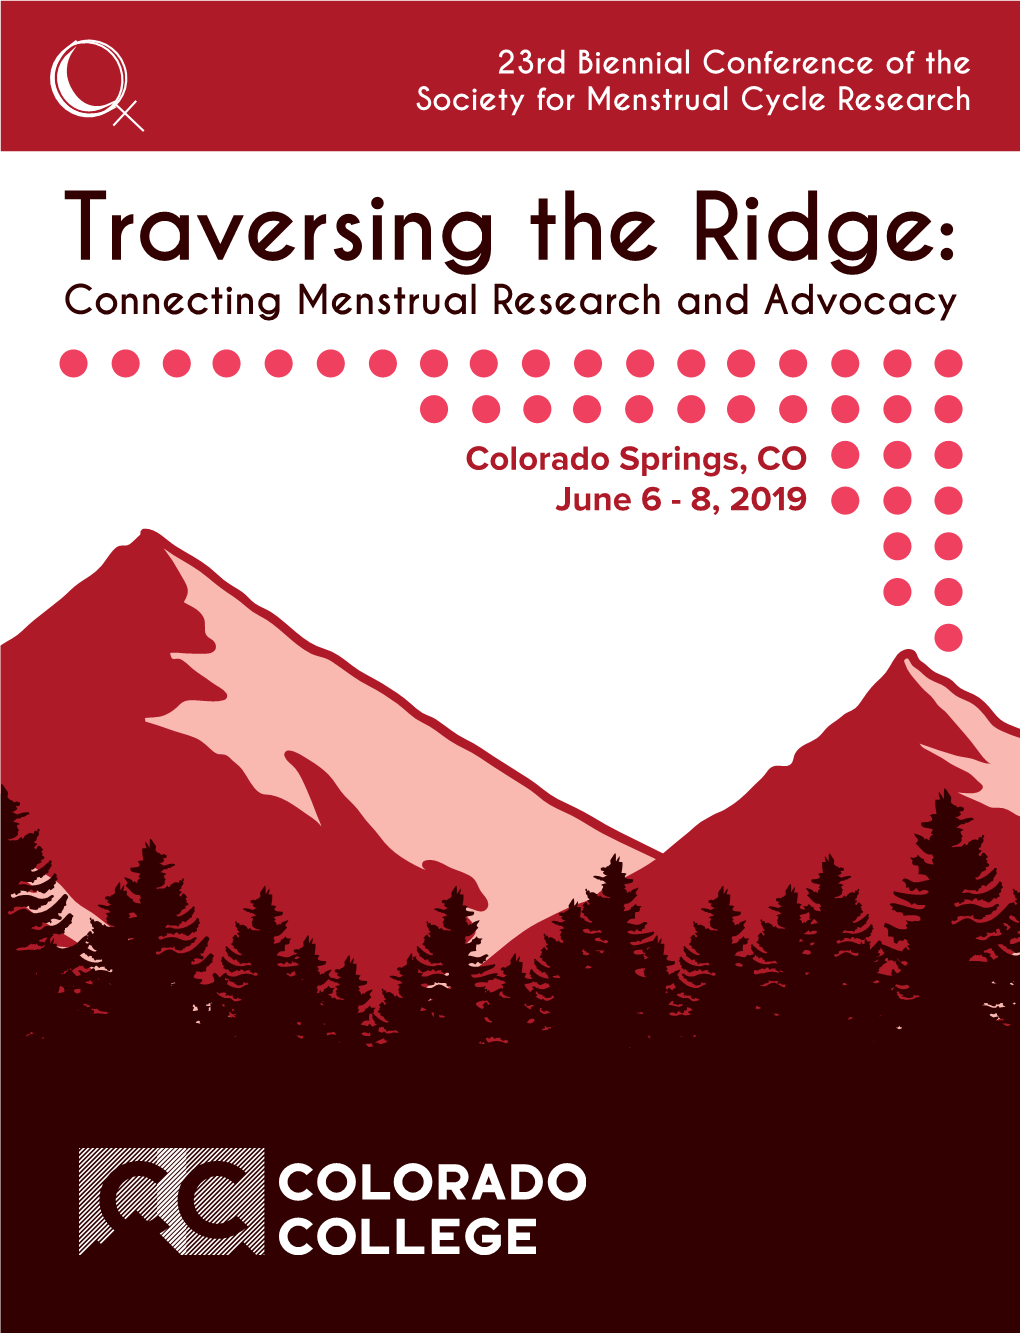 Traversing the Ridge: Connecting Menstrual Research and Advocacy